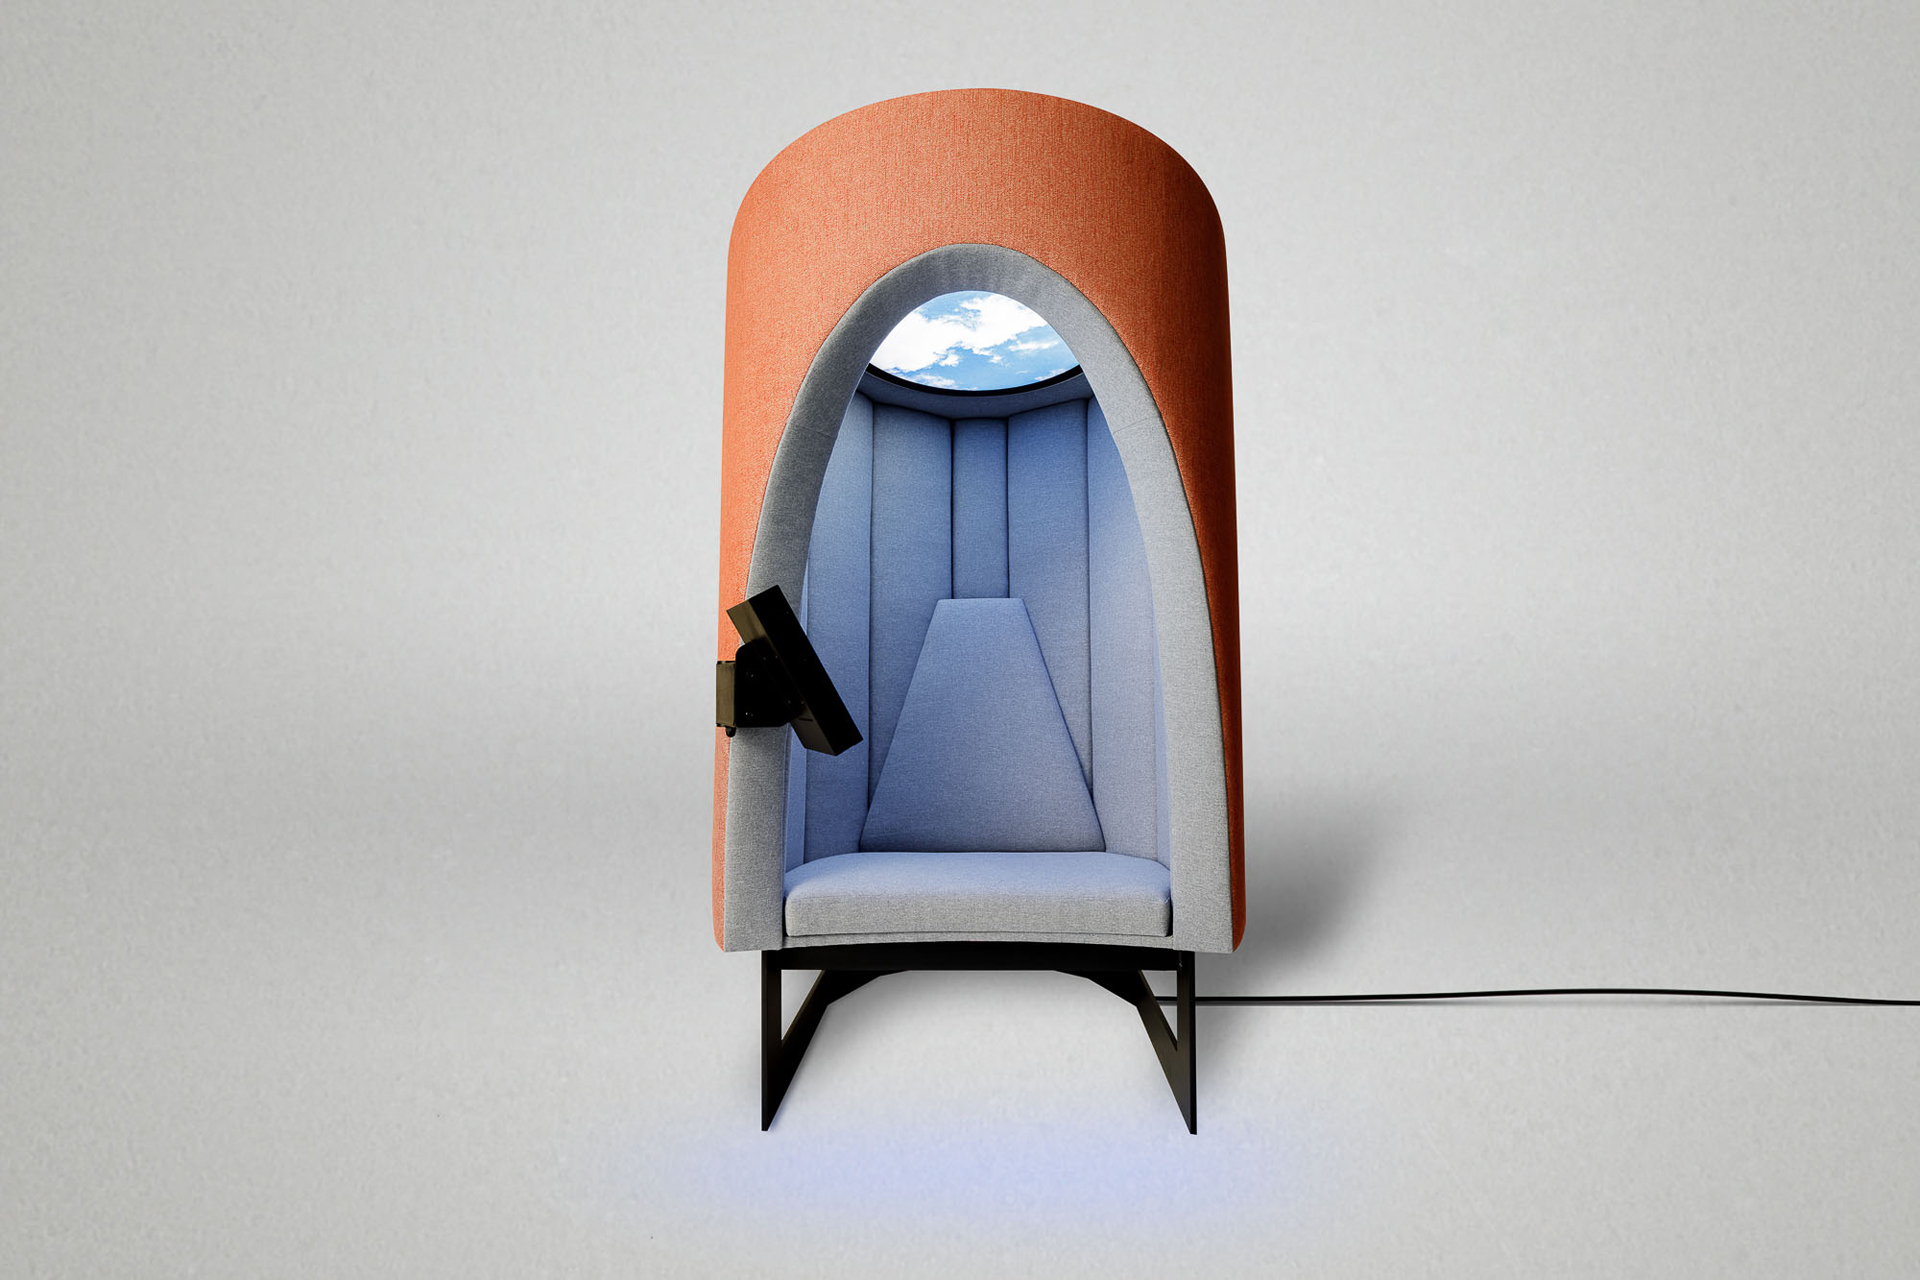 New: MUSE – the interactive lounge chair